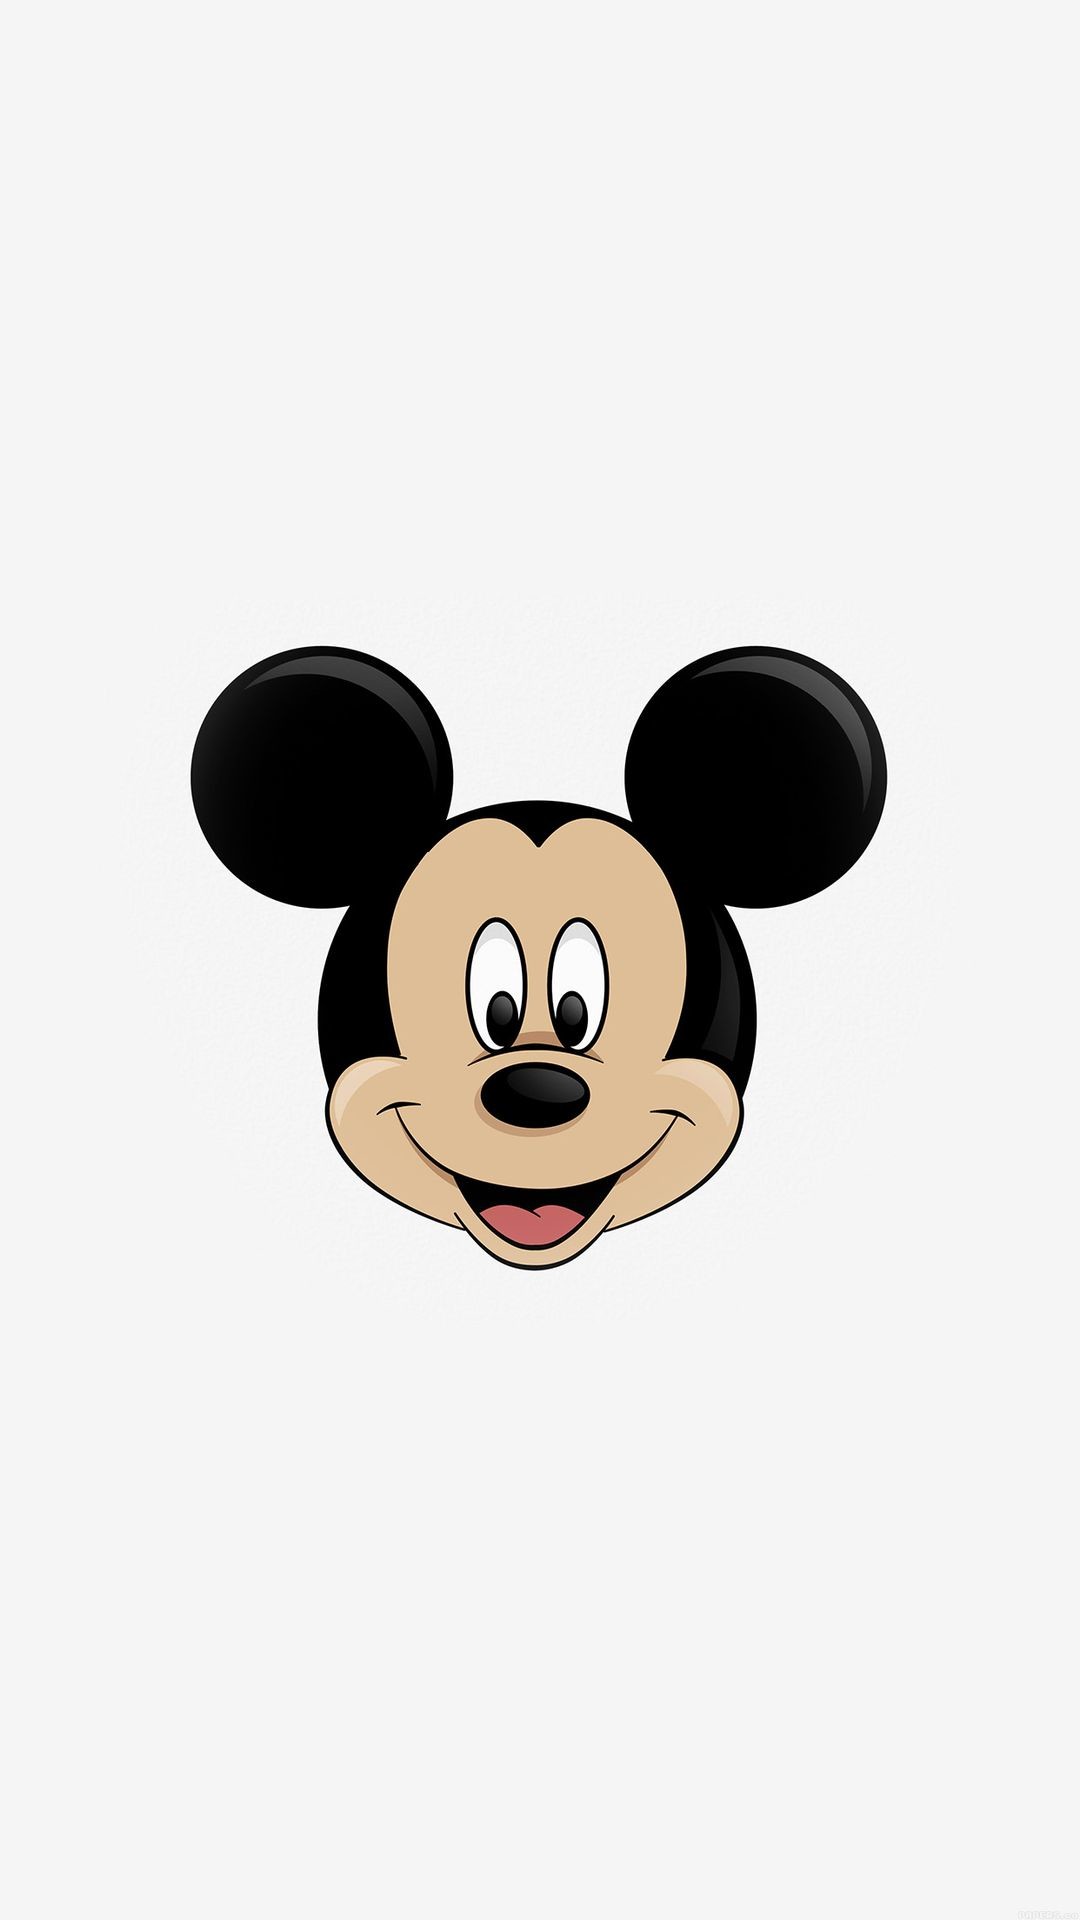 1080x1920 Download Mickey Mouse Disney iPhone Wallpapers. Tap to see more iPhone  backgrounds - @mobile9